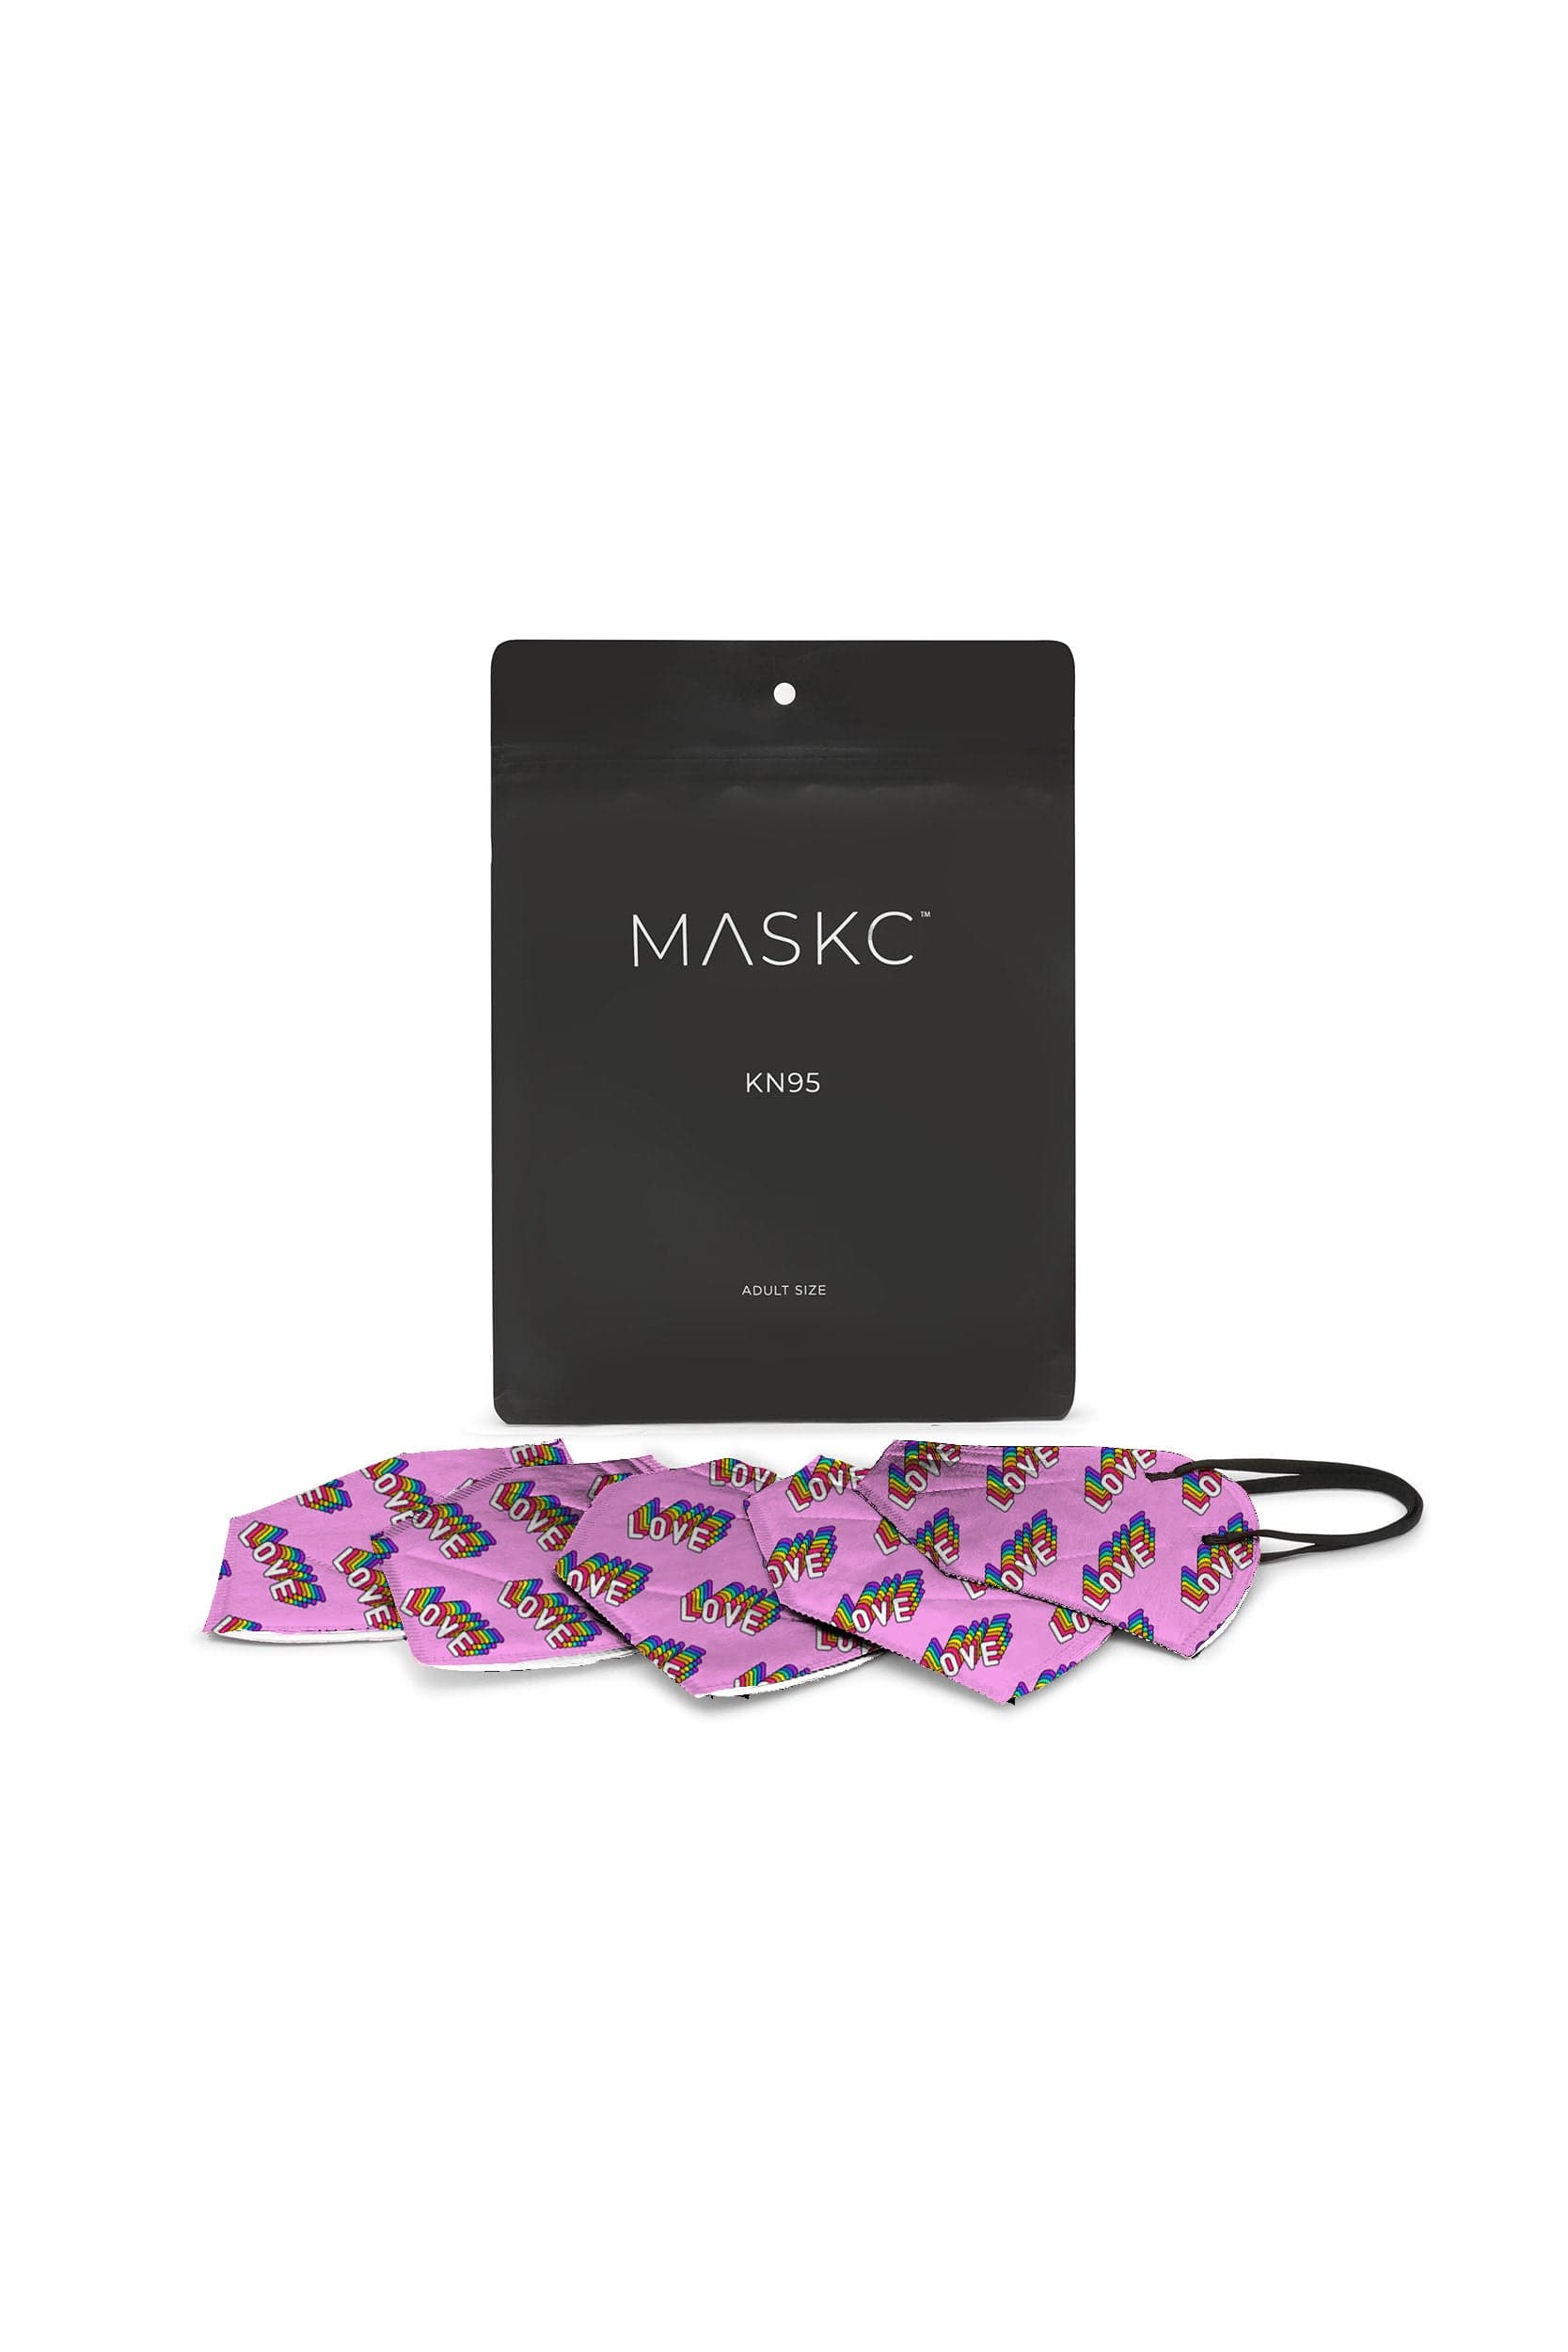 Pack of Rainbow Love KN95 face masks. Each pack contains stylish high quality face masks. 